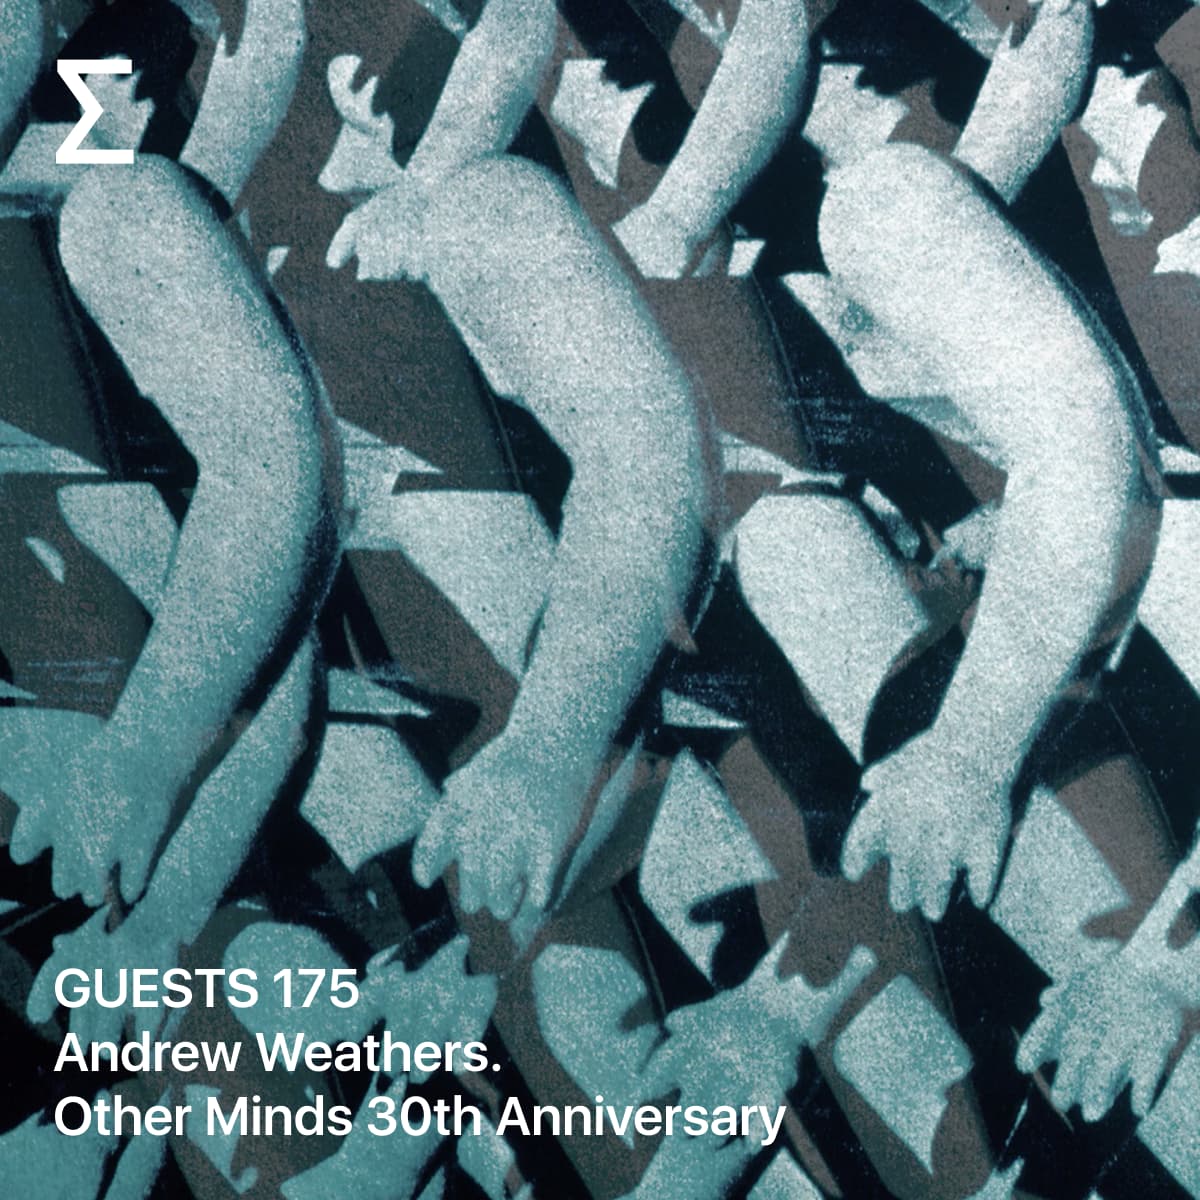 GUESTS 175 – Andrew Weathers. Other Minds 30th Anniversary